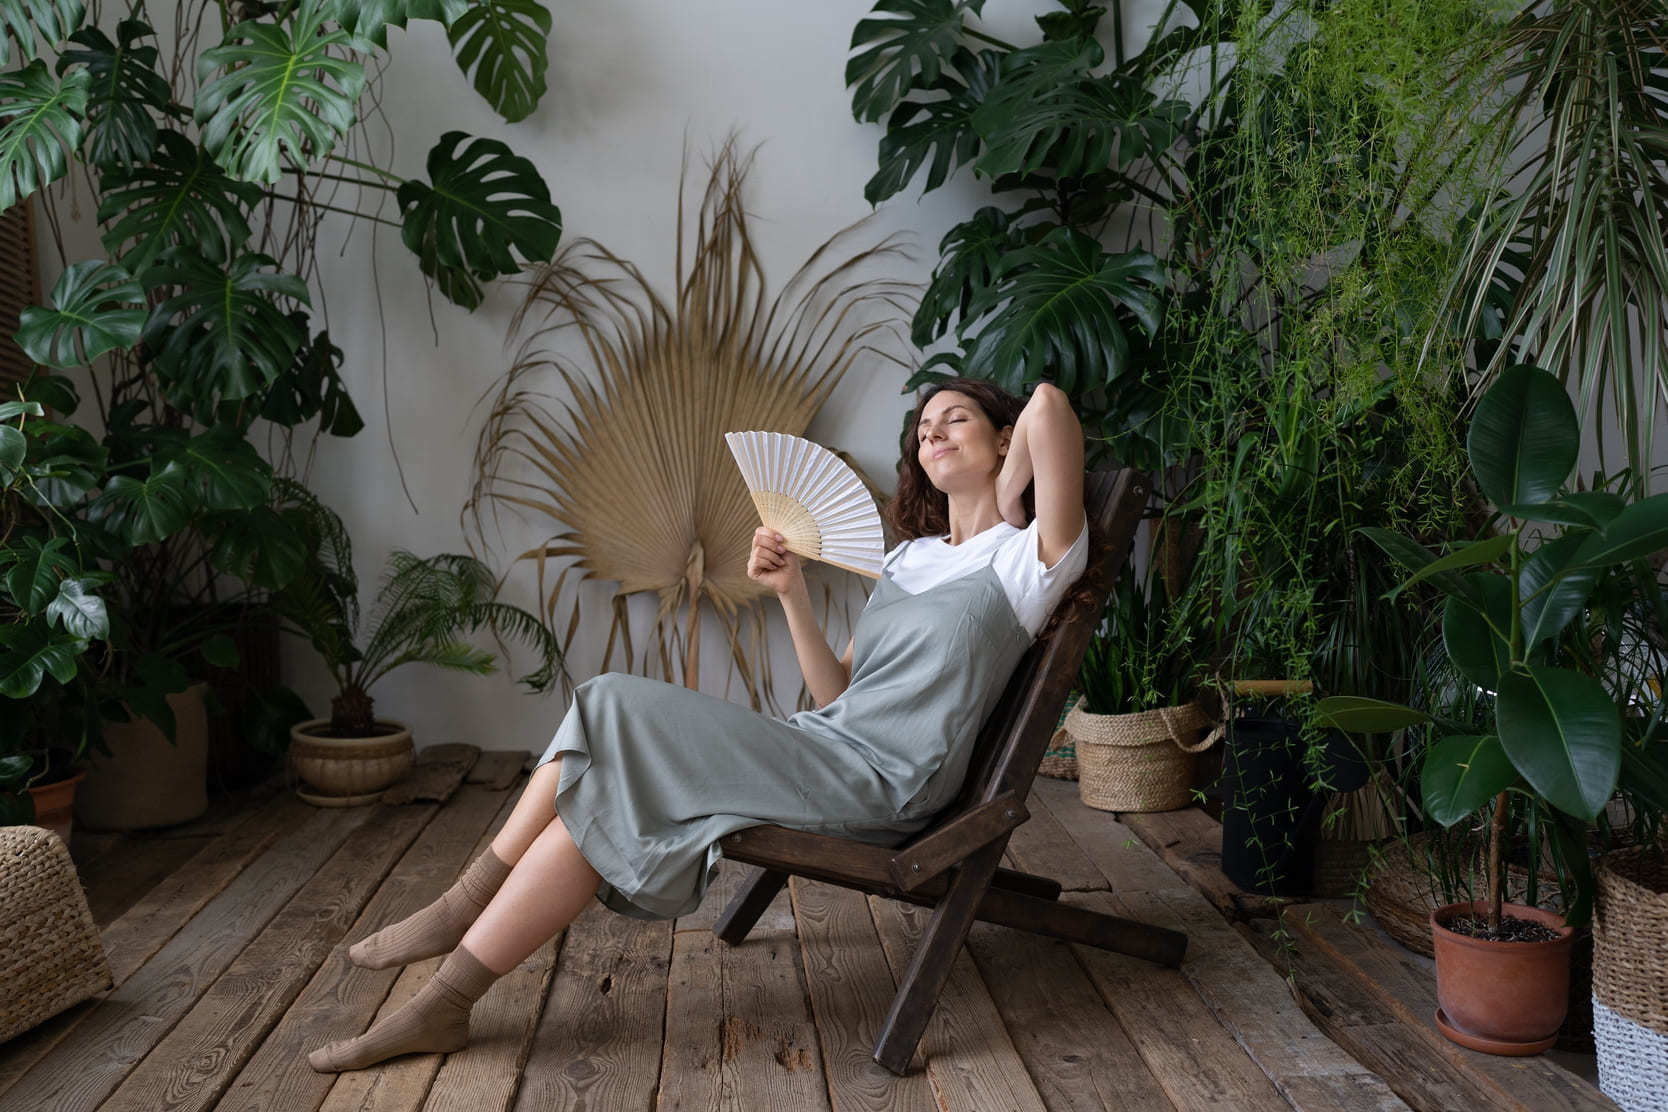 Woman cooling off with a fan in a plant-filled room